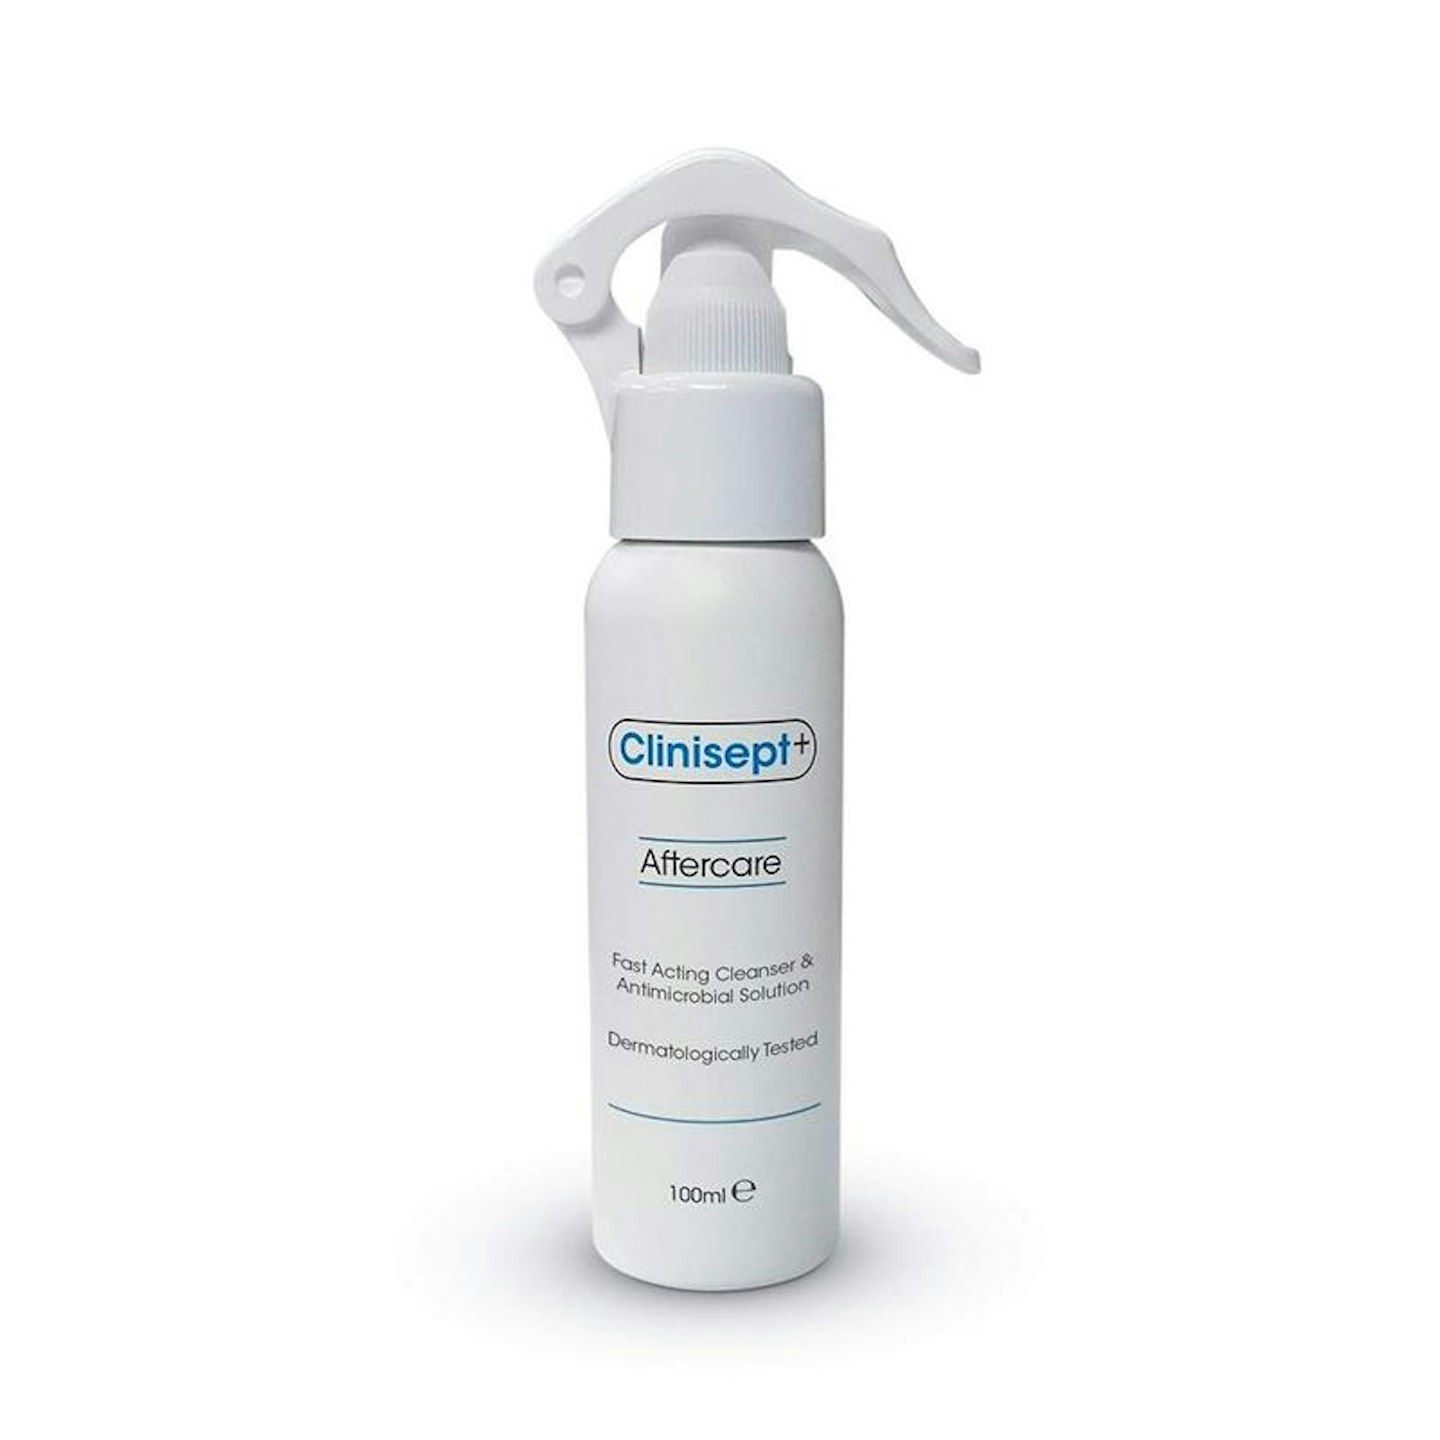 Clinisept Plus Aftercare, £14.99